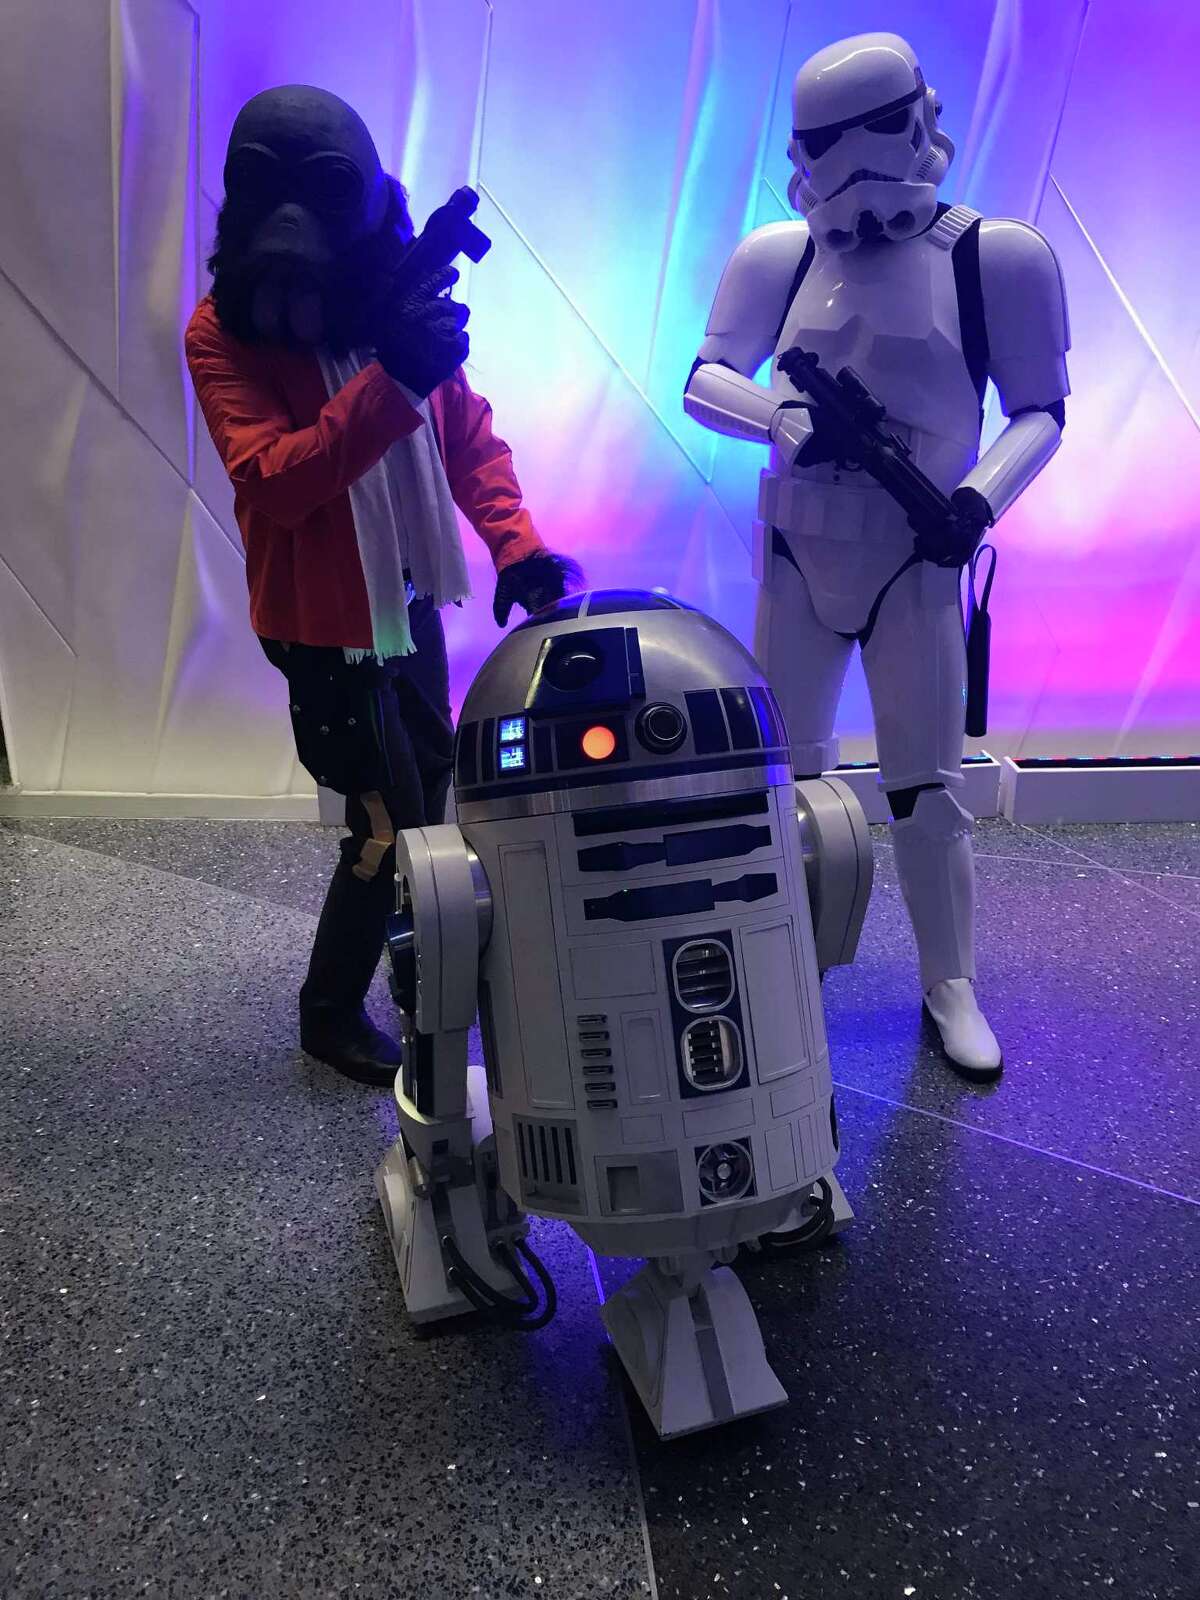 Costumed characters from “Star Wars” prowl the Tobin Center lobby Friday night ahead of the San Antonio Symphony’s movie concert.